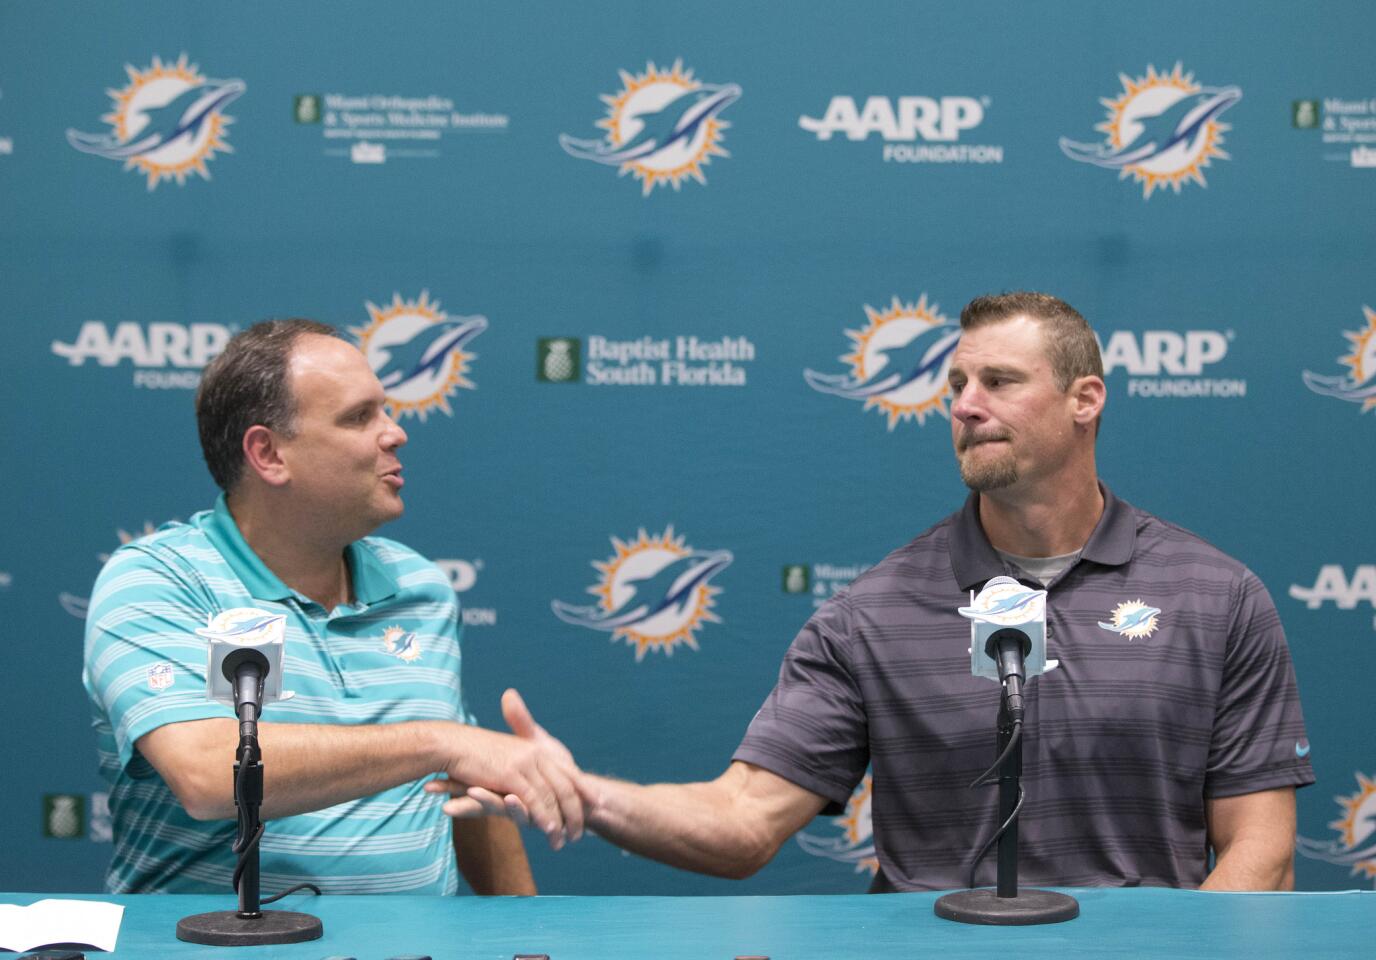 Mike Tannenbaum, left, Miami Dolphins executive vice president of football operations, shakes hands with former tight ends coach Dan Campbell, after announcing that Campbell was being promoted to interim head coach, Monday, Oct. 5, 2015 in Davie, Fla. (AP Photo/Wilfredo Lee)